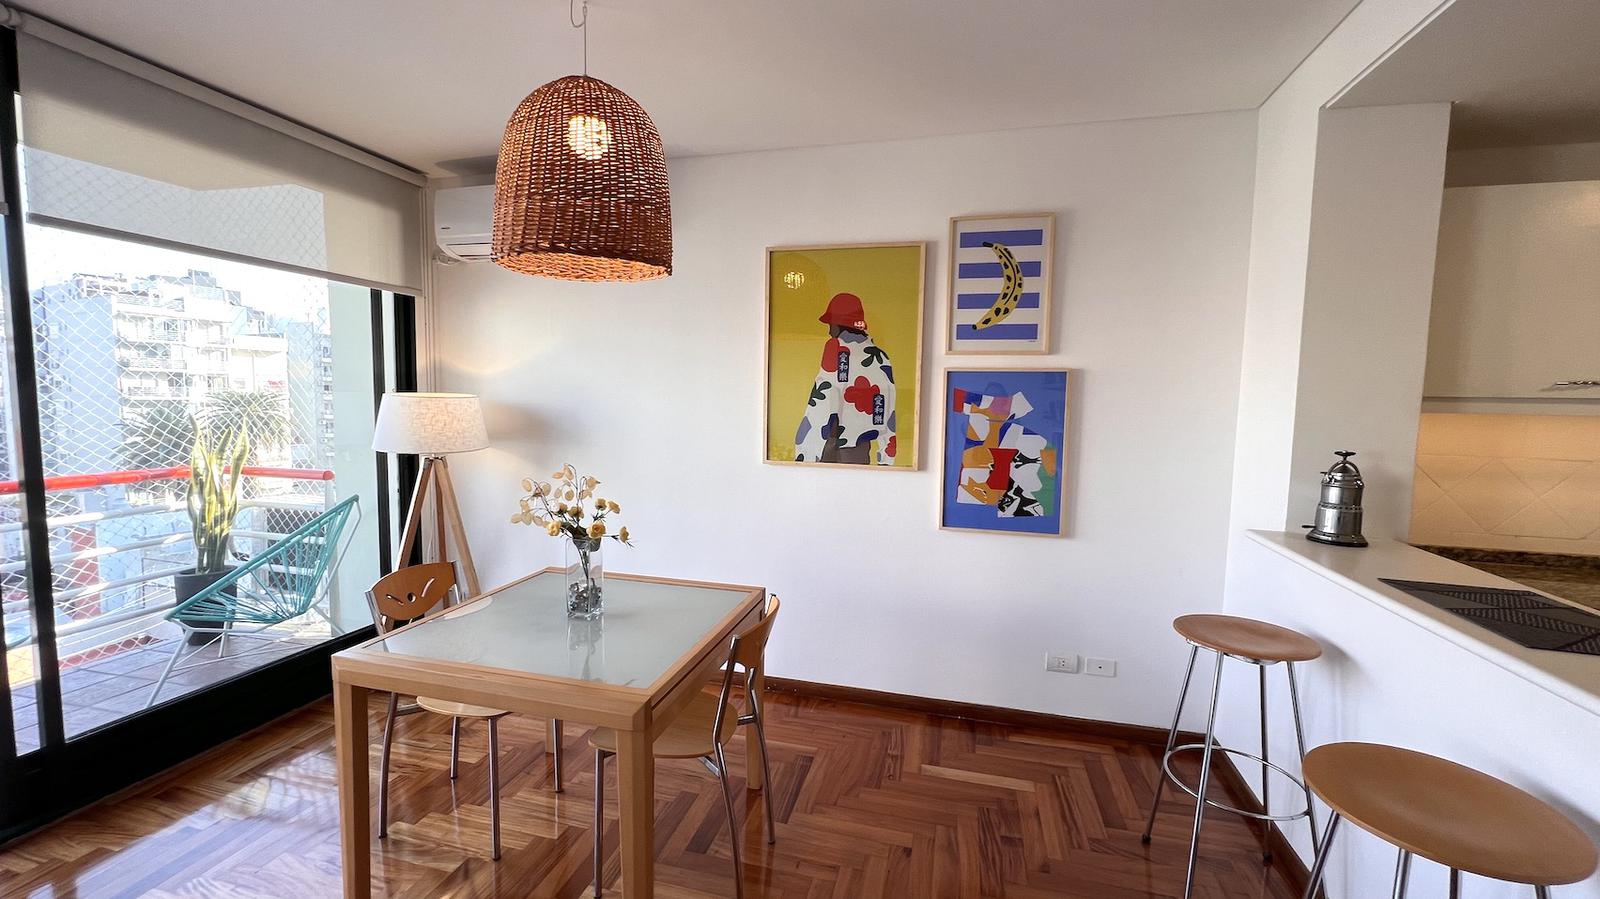 #4377711 | Alquiler | Departamento | Palermo Viejo (Your Place in Buenos Aires)